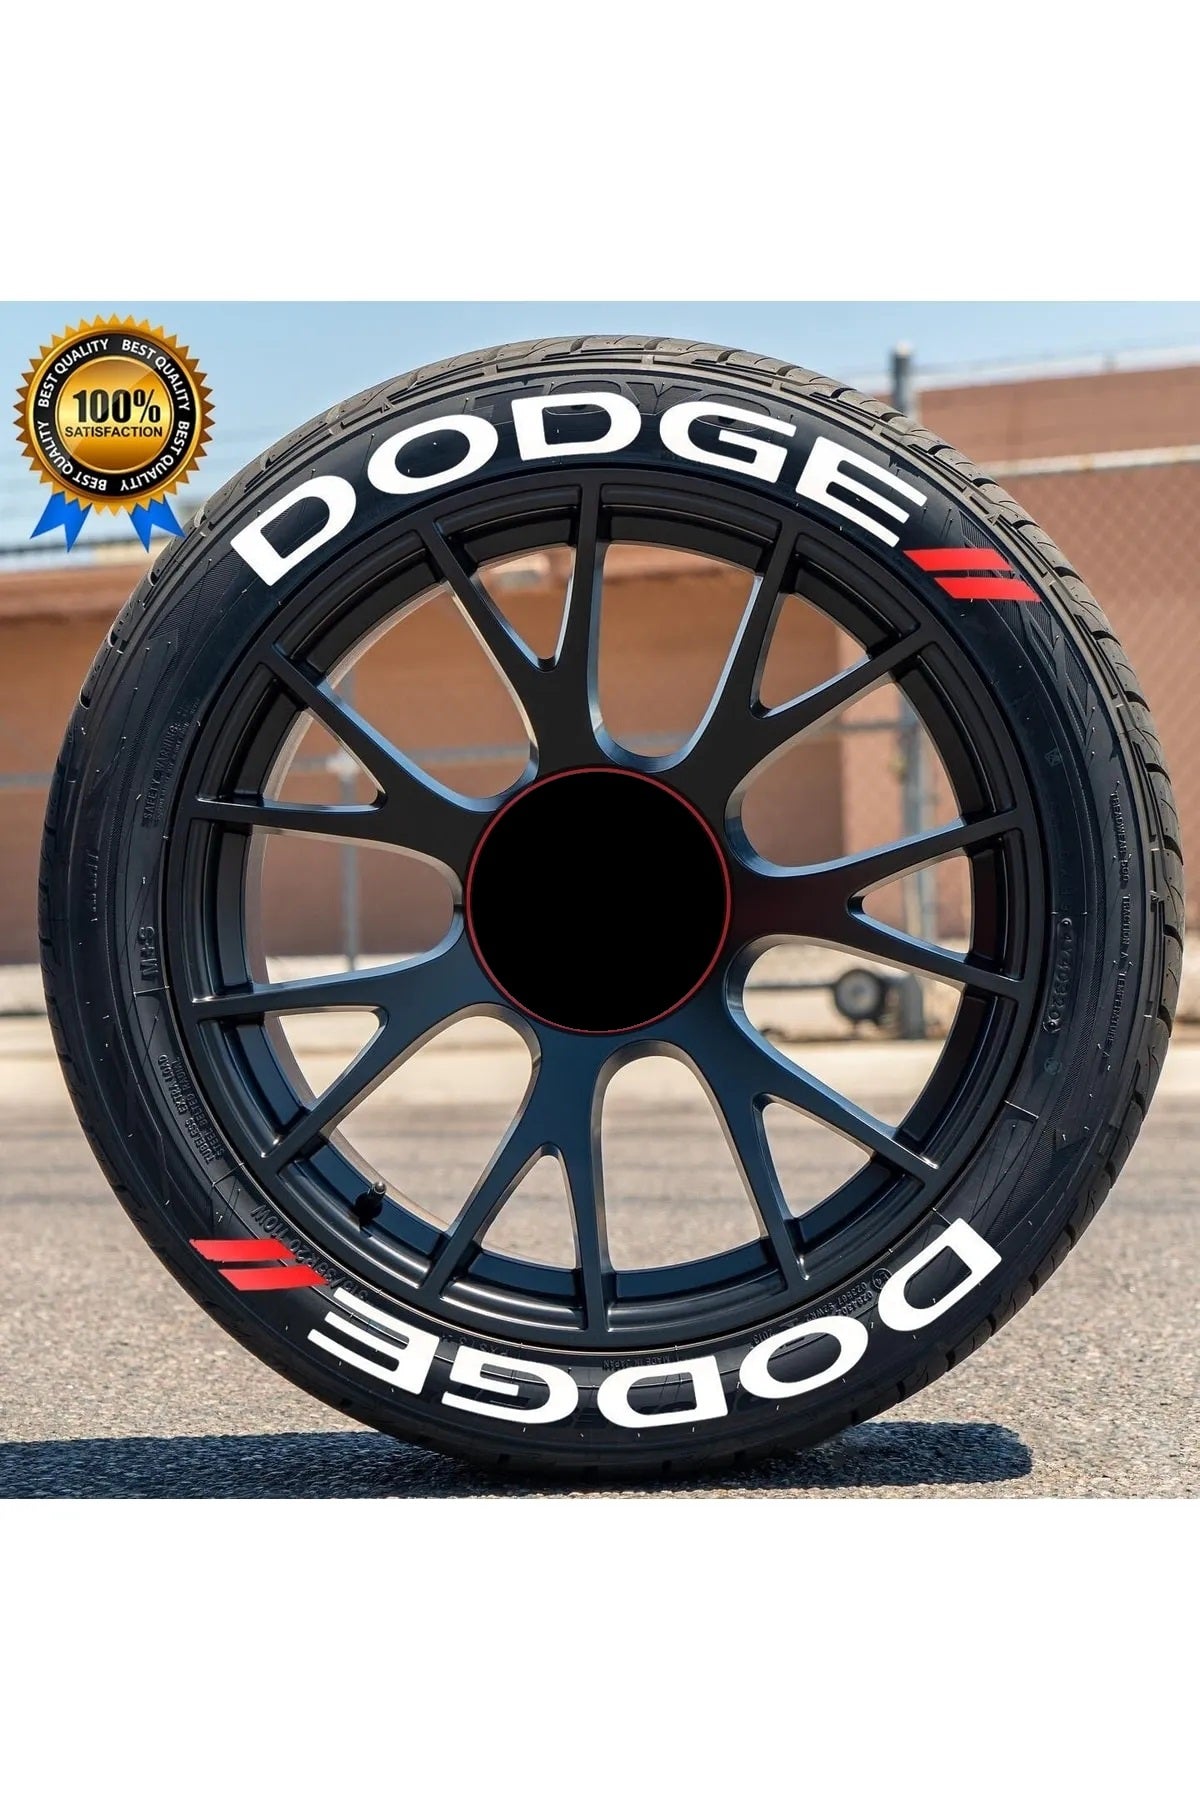 Tire Lettering DODGE Permanent raised Stickers fits to 16"-22" Set for all 4 tires universal Stickers fitment EXPRESS Shipping DODGE TİRE LETTER